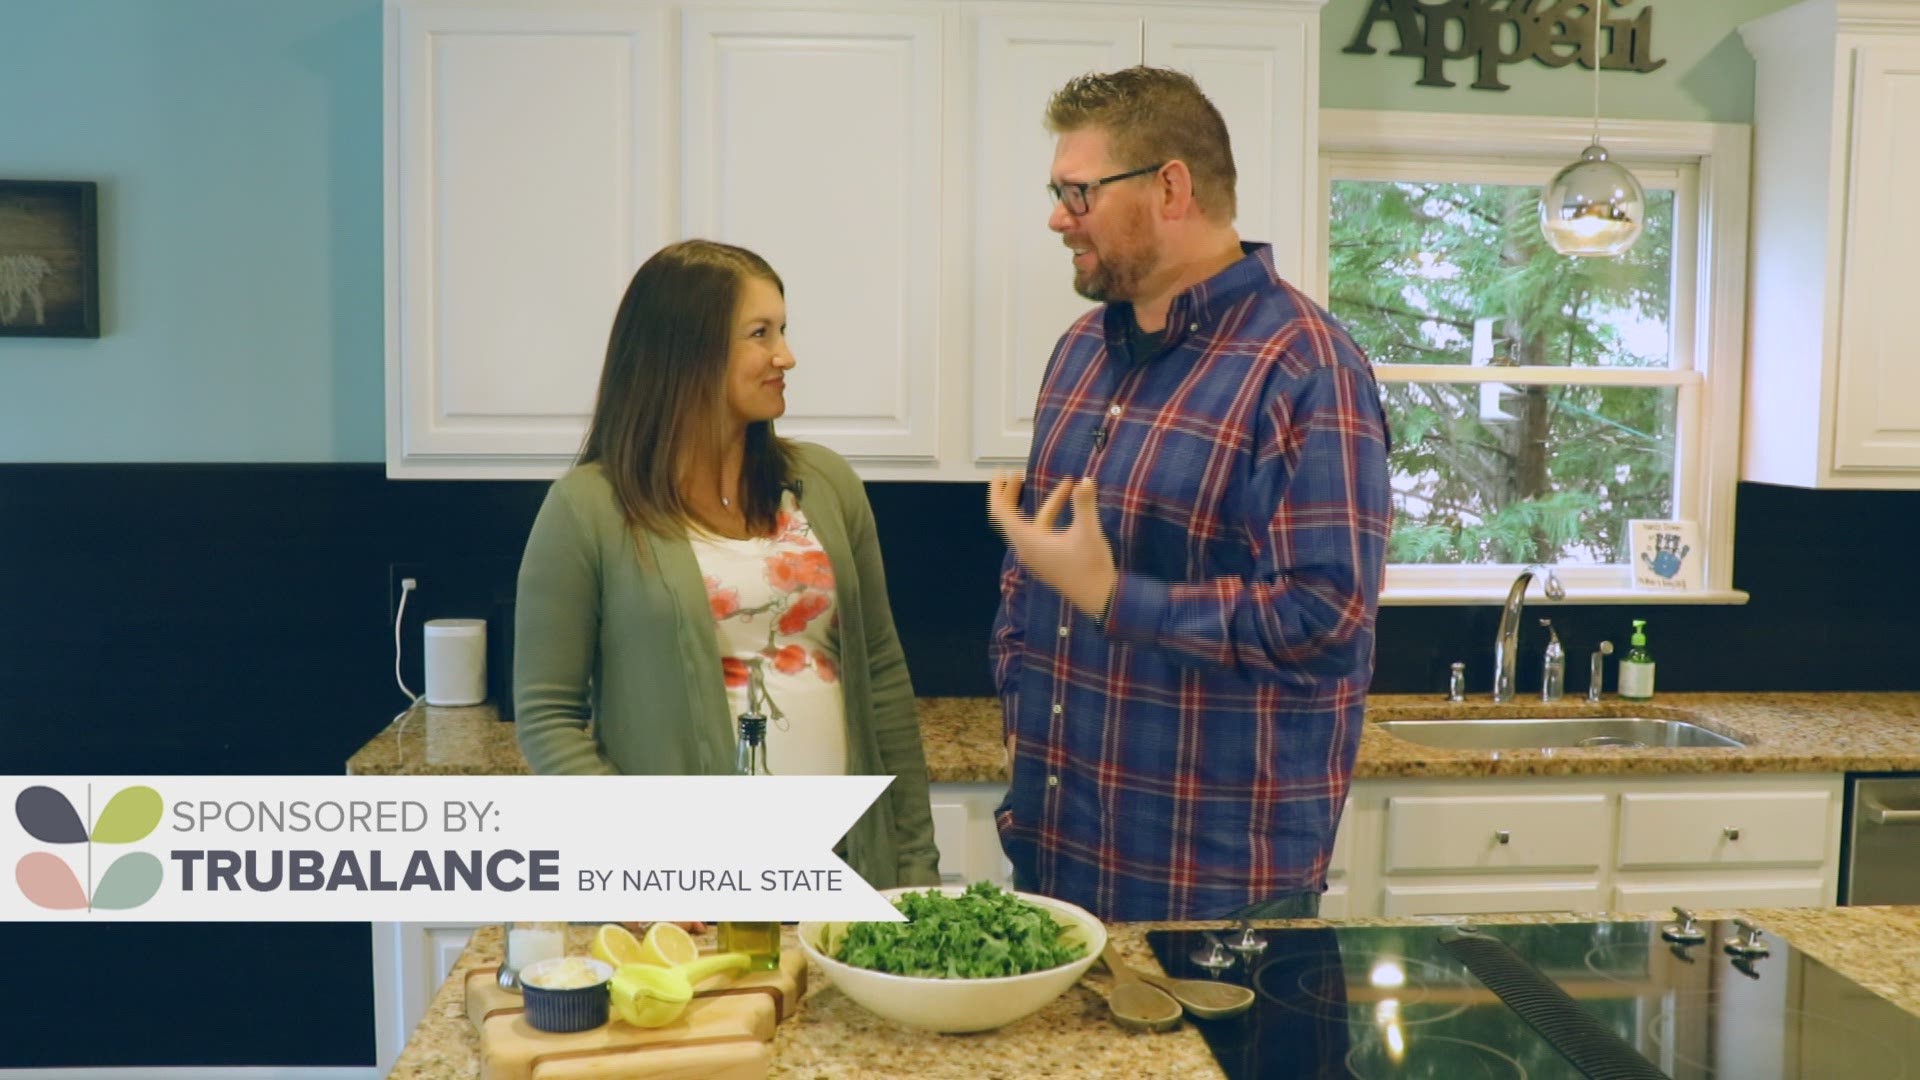 Adam meets up with Dr. Kiernan with TruBalance for tips on healthy eating around the holidays.